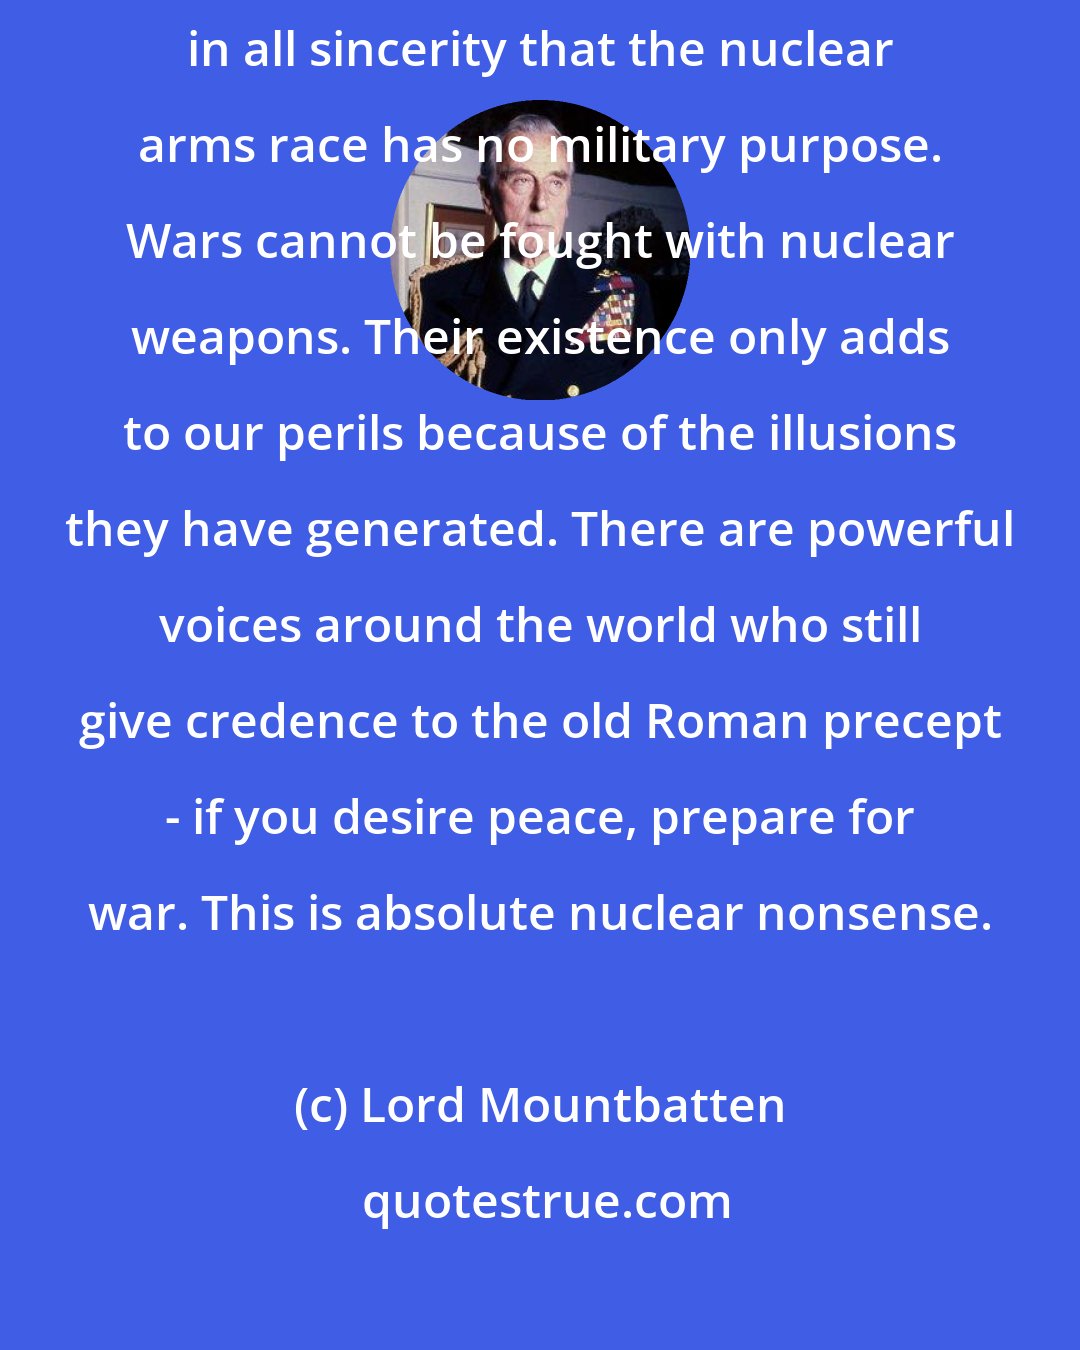 Lord Mountbatten: As a military man who has given half a century of active service I say in all sincerity that the nuclear arms race has no military purpose. Wars cannot be fought with nuclear weapons. Their existence only adds to our perils because of the illusions they have generated. There are powerful voices around the world who still give credence to the old Roman precept - if you desire peace, prepare for war. This is absolute nuclear nonsense.